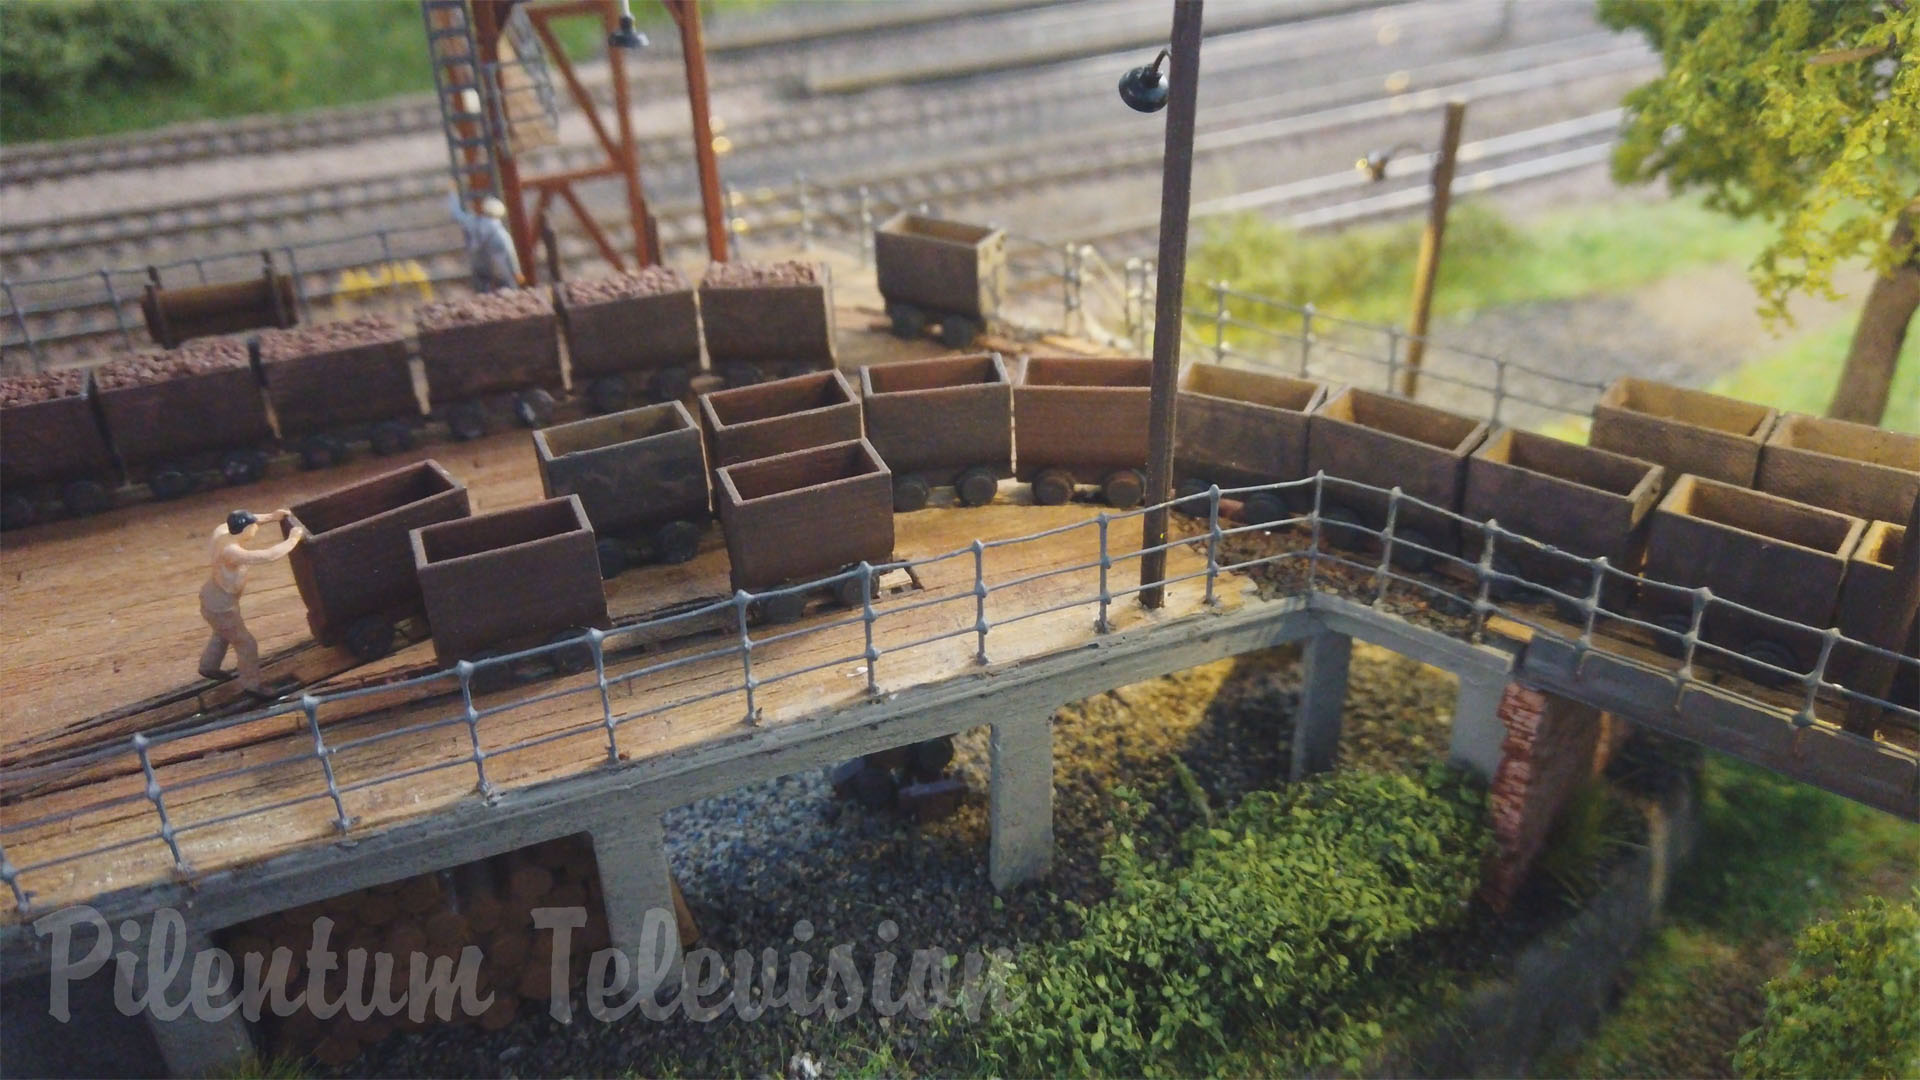 TT Scale Model Trains and Steam Locos - Modular Model Railway Layout in Germany